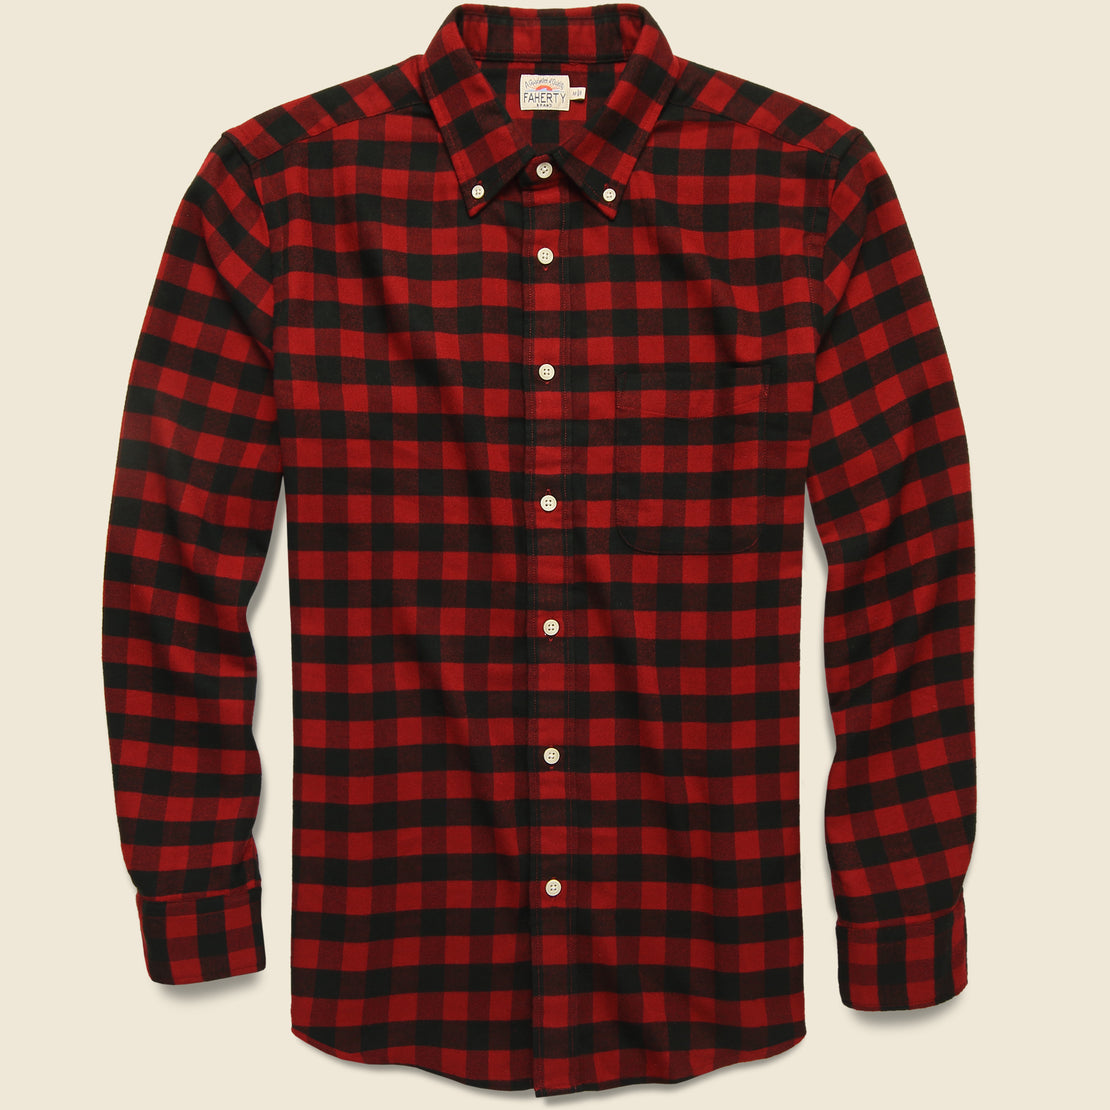 Faherty Legend Woven Shirt - Red Tahoe Check